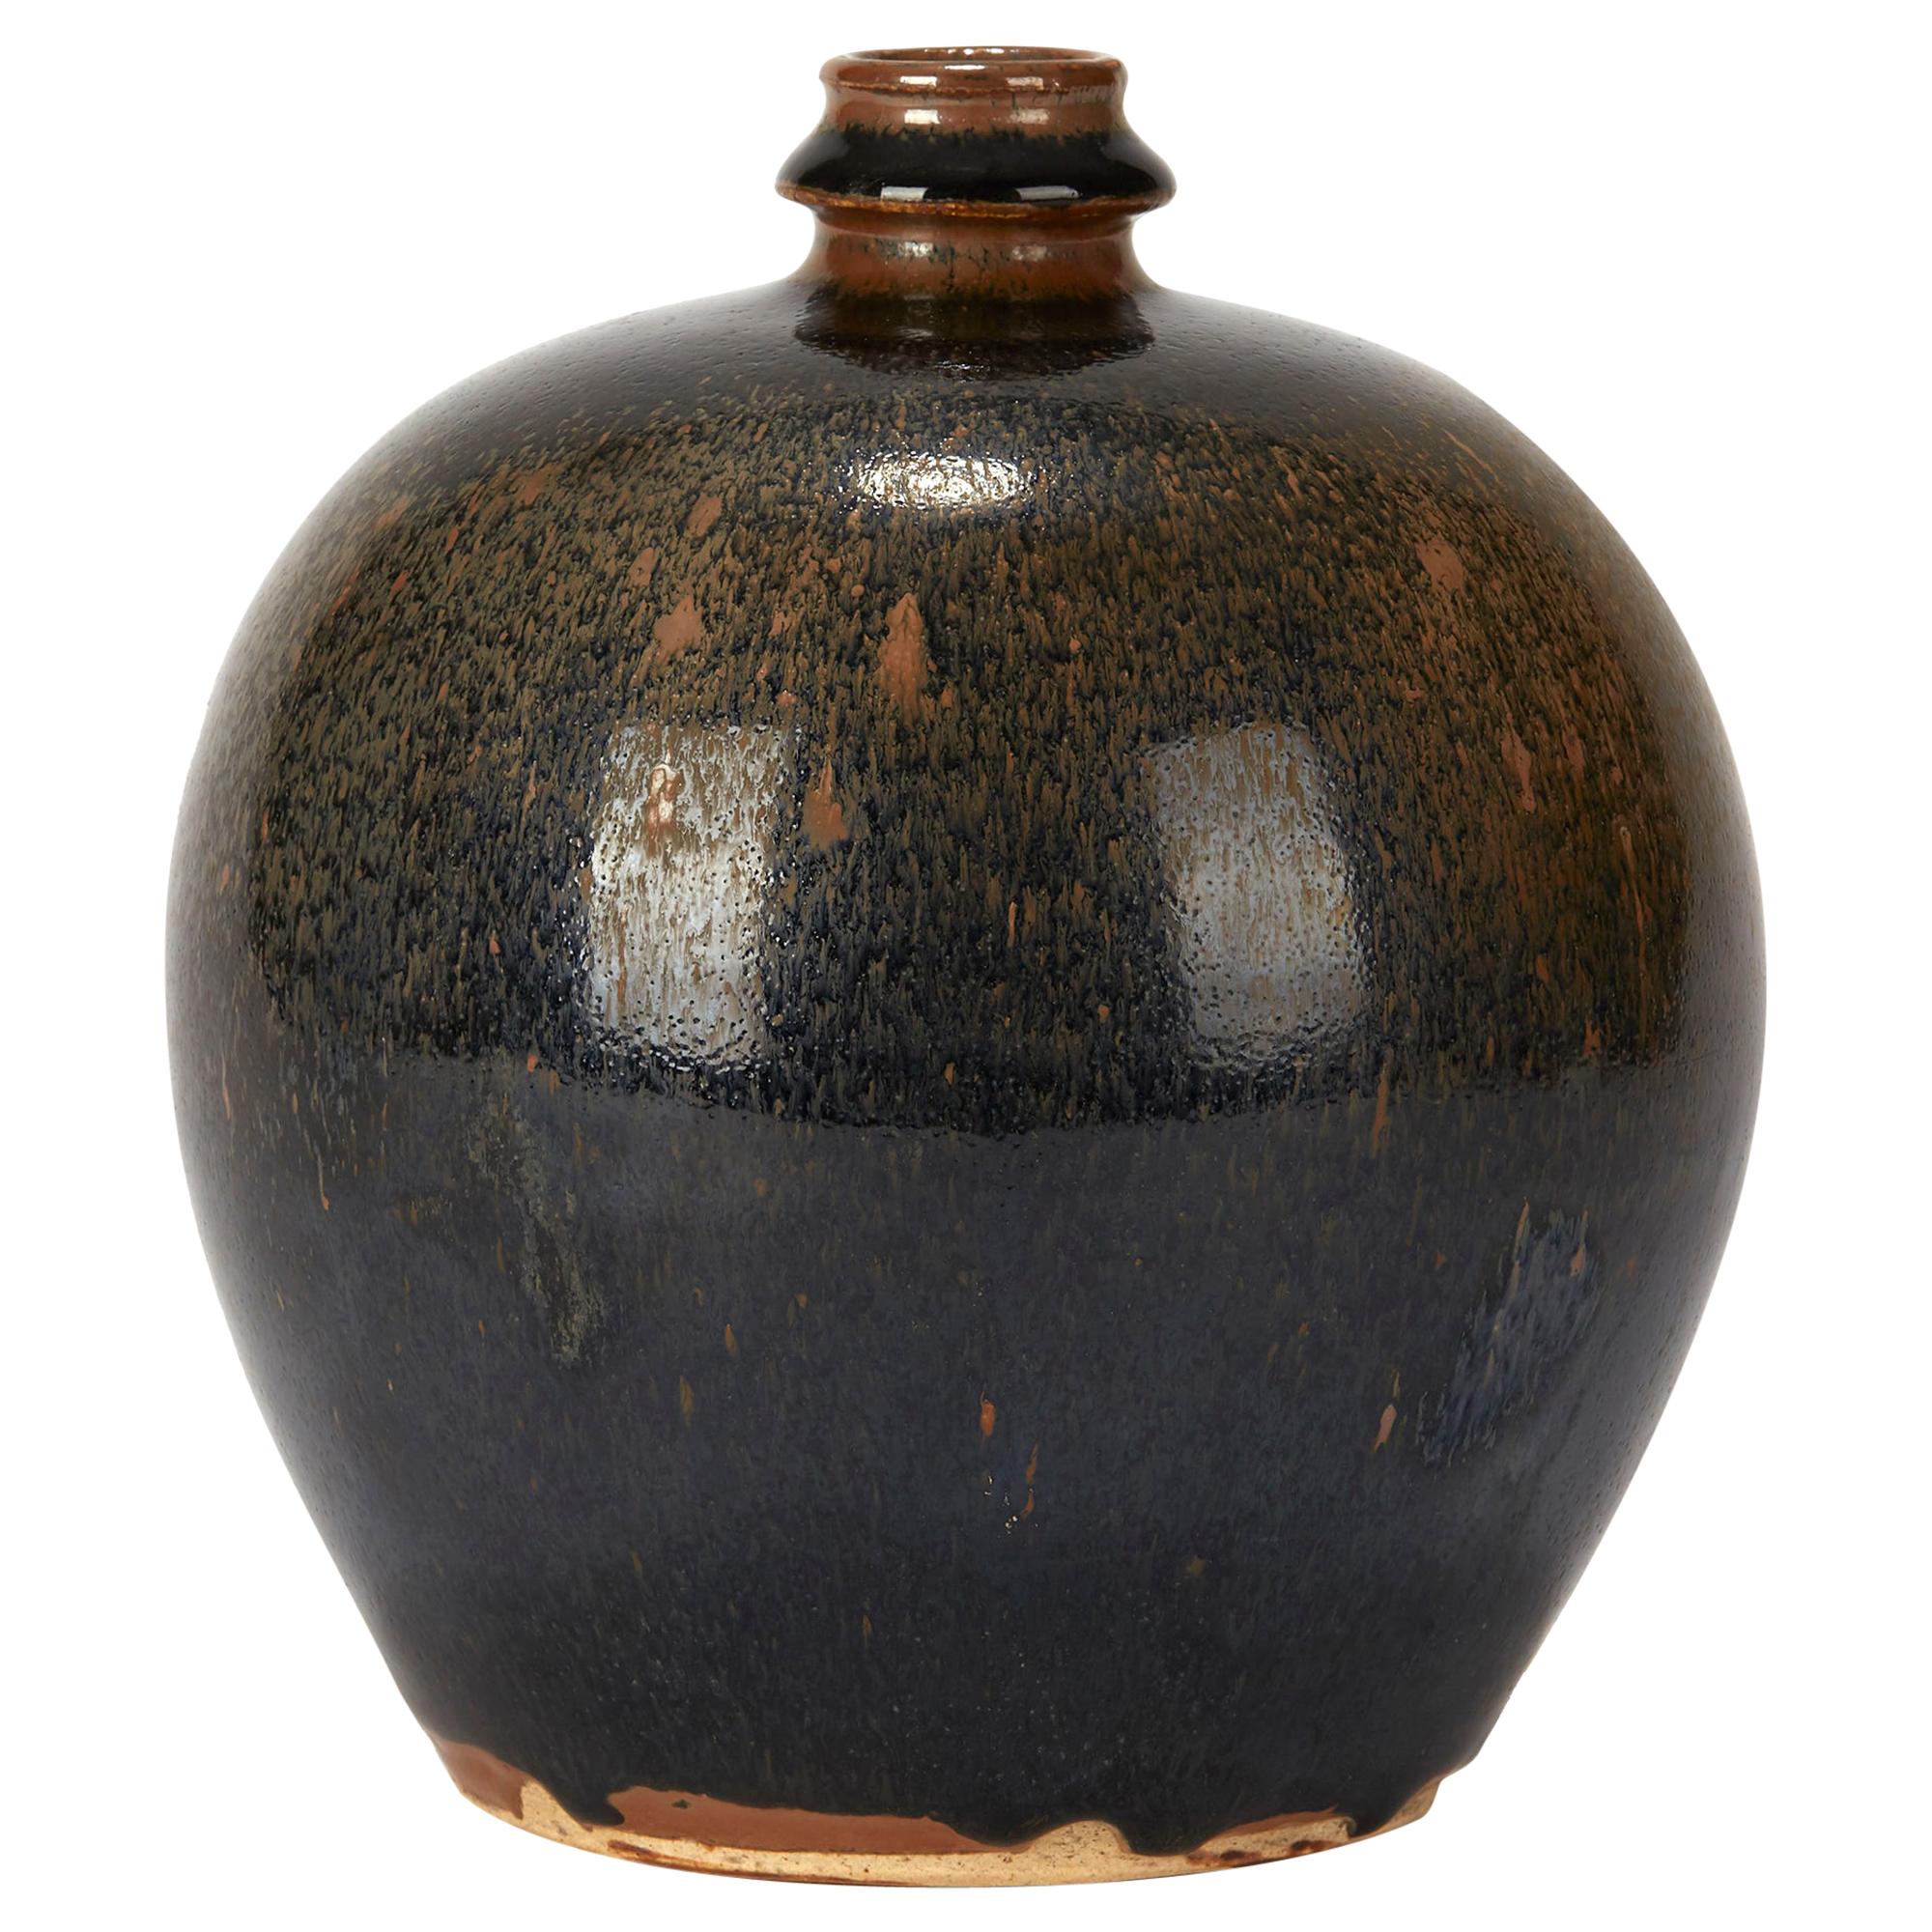 Chinese Black and Brown Haresfur Glazed Bulbous Pottery Vase, 20th Century